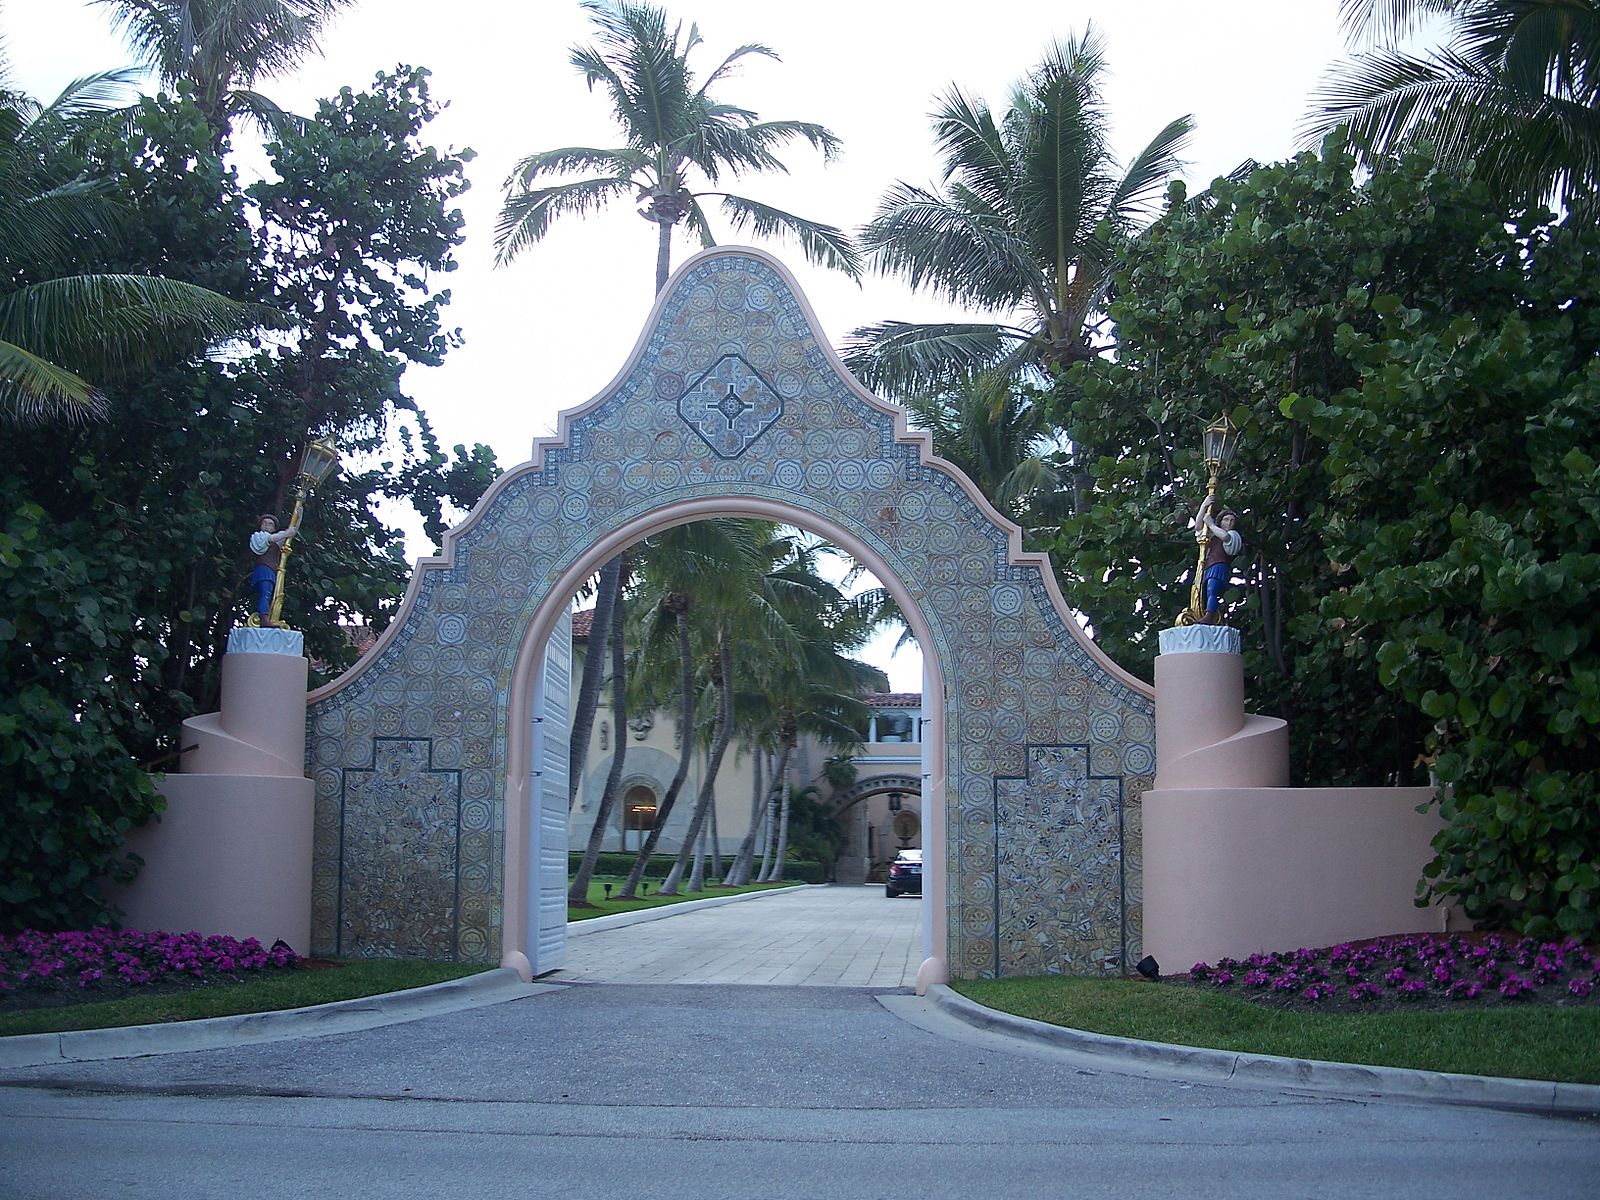 The entrance to President Trump's Mar-a-Lago resort in Florida.